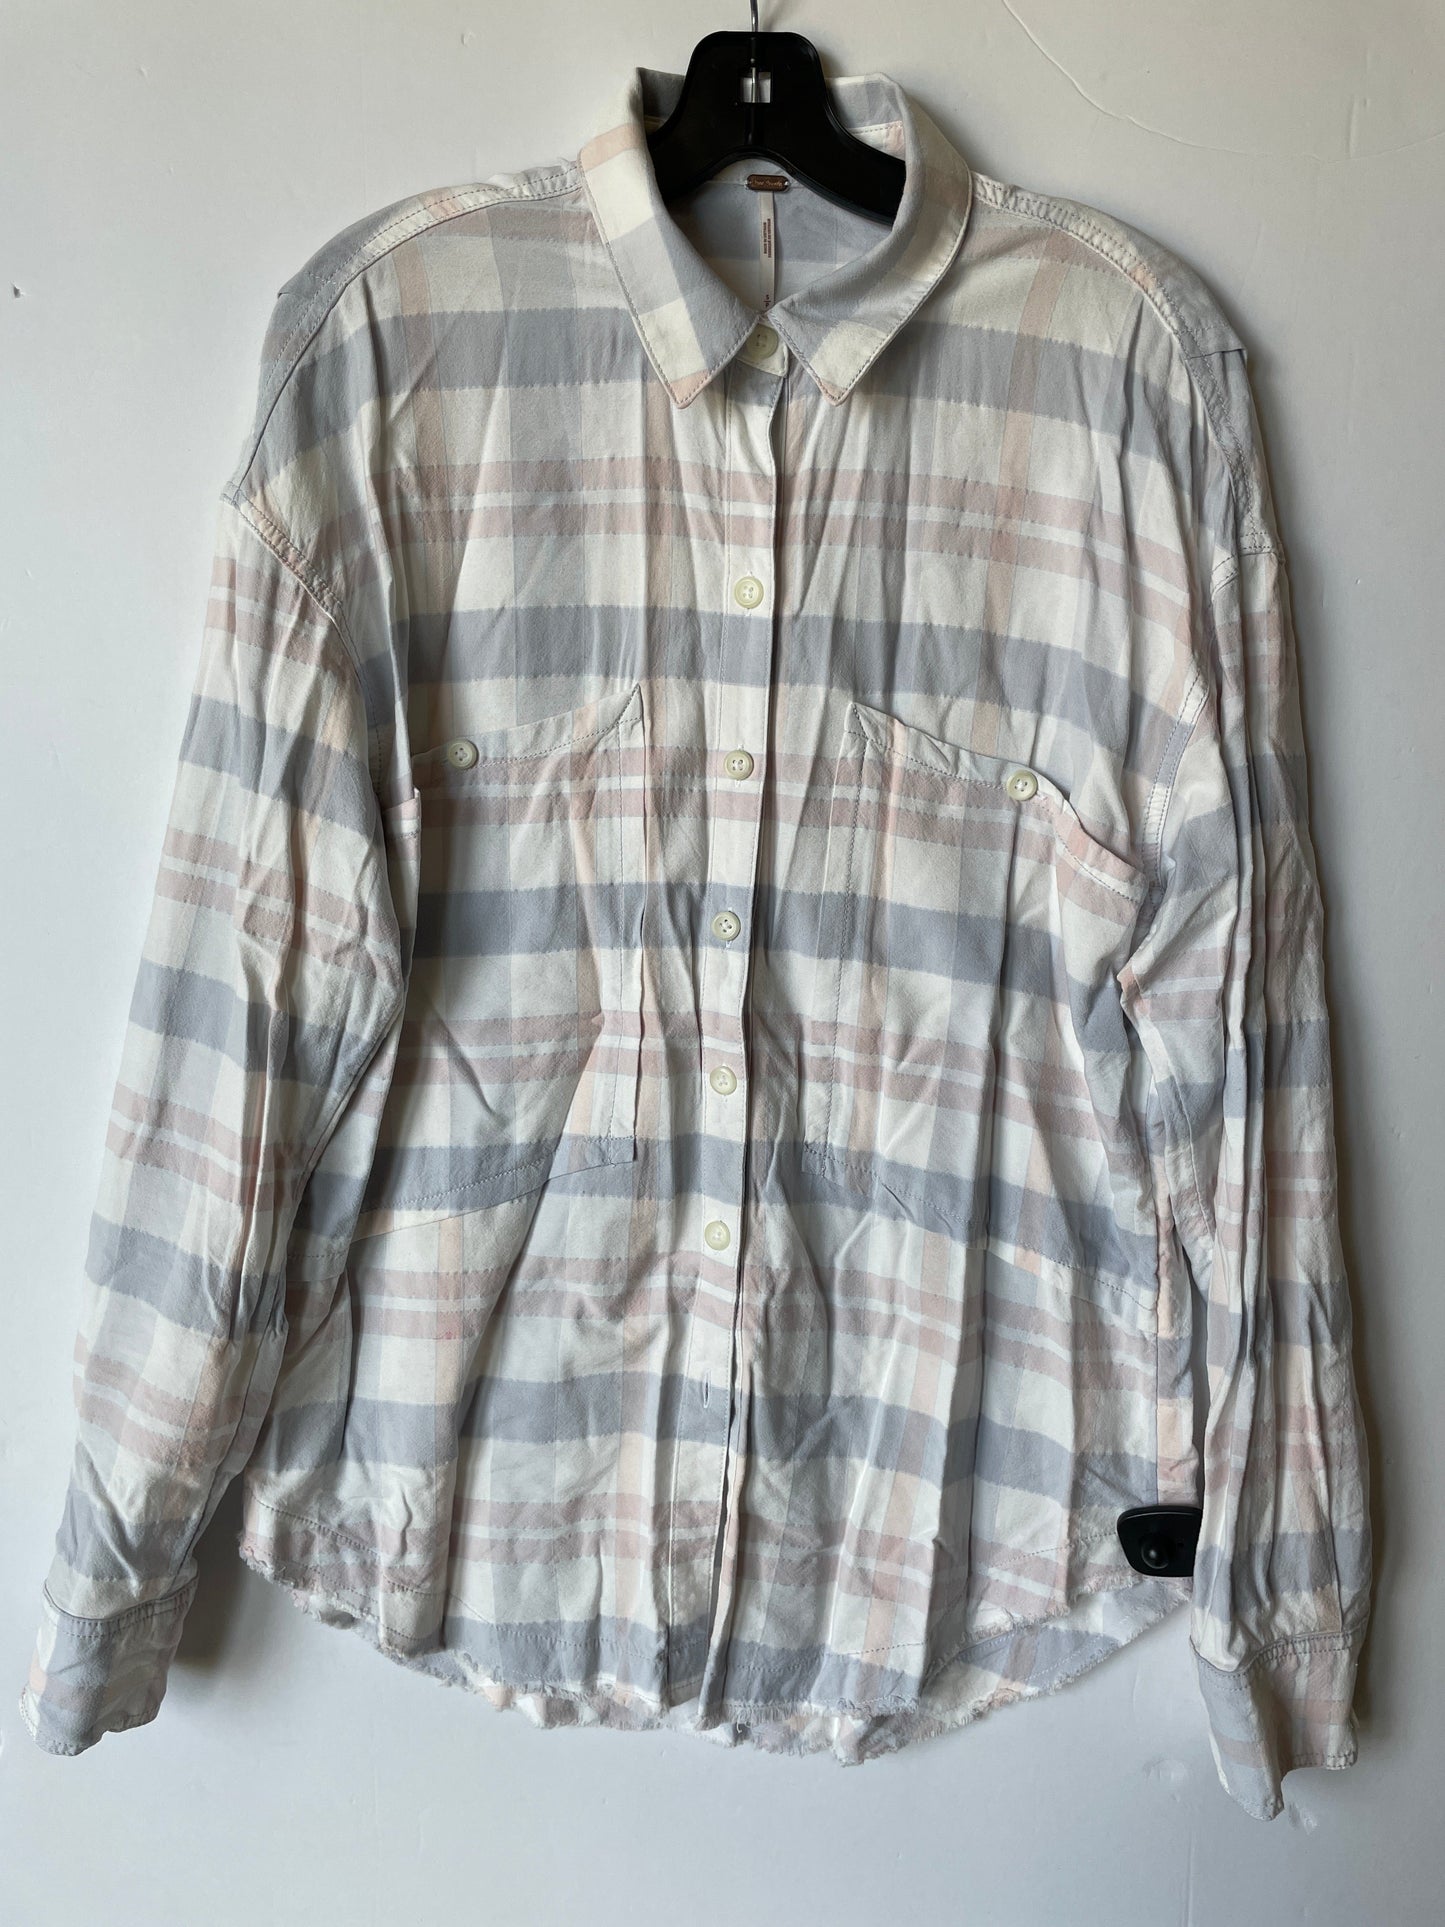 Plaid Pattern Top Long Sleeve Free People, Size S